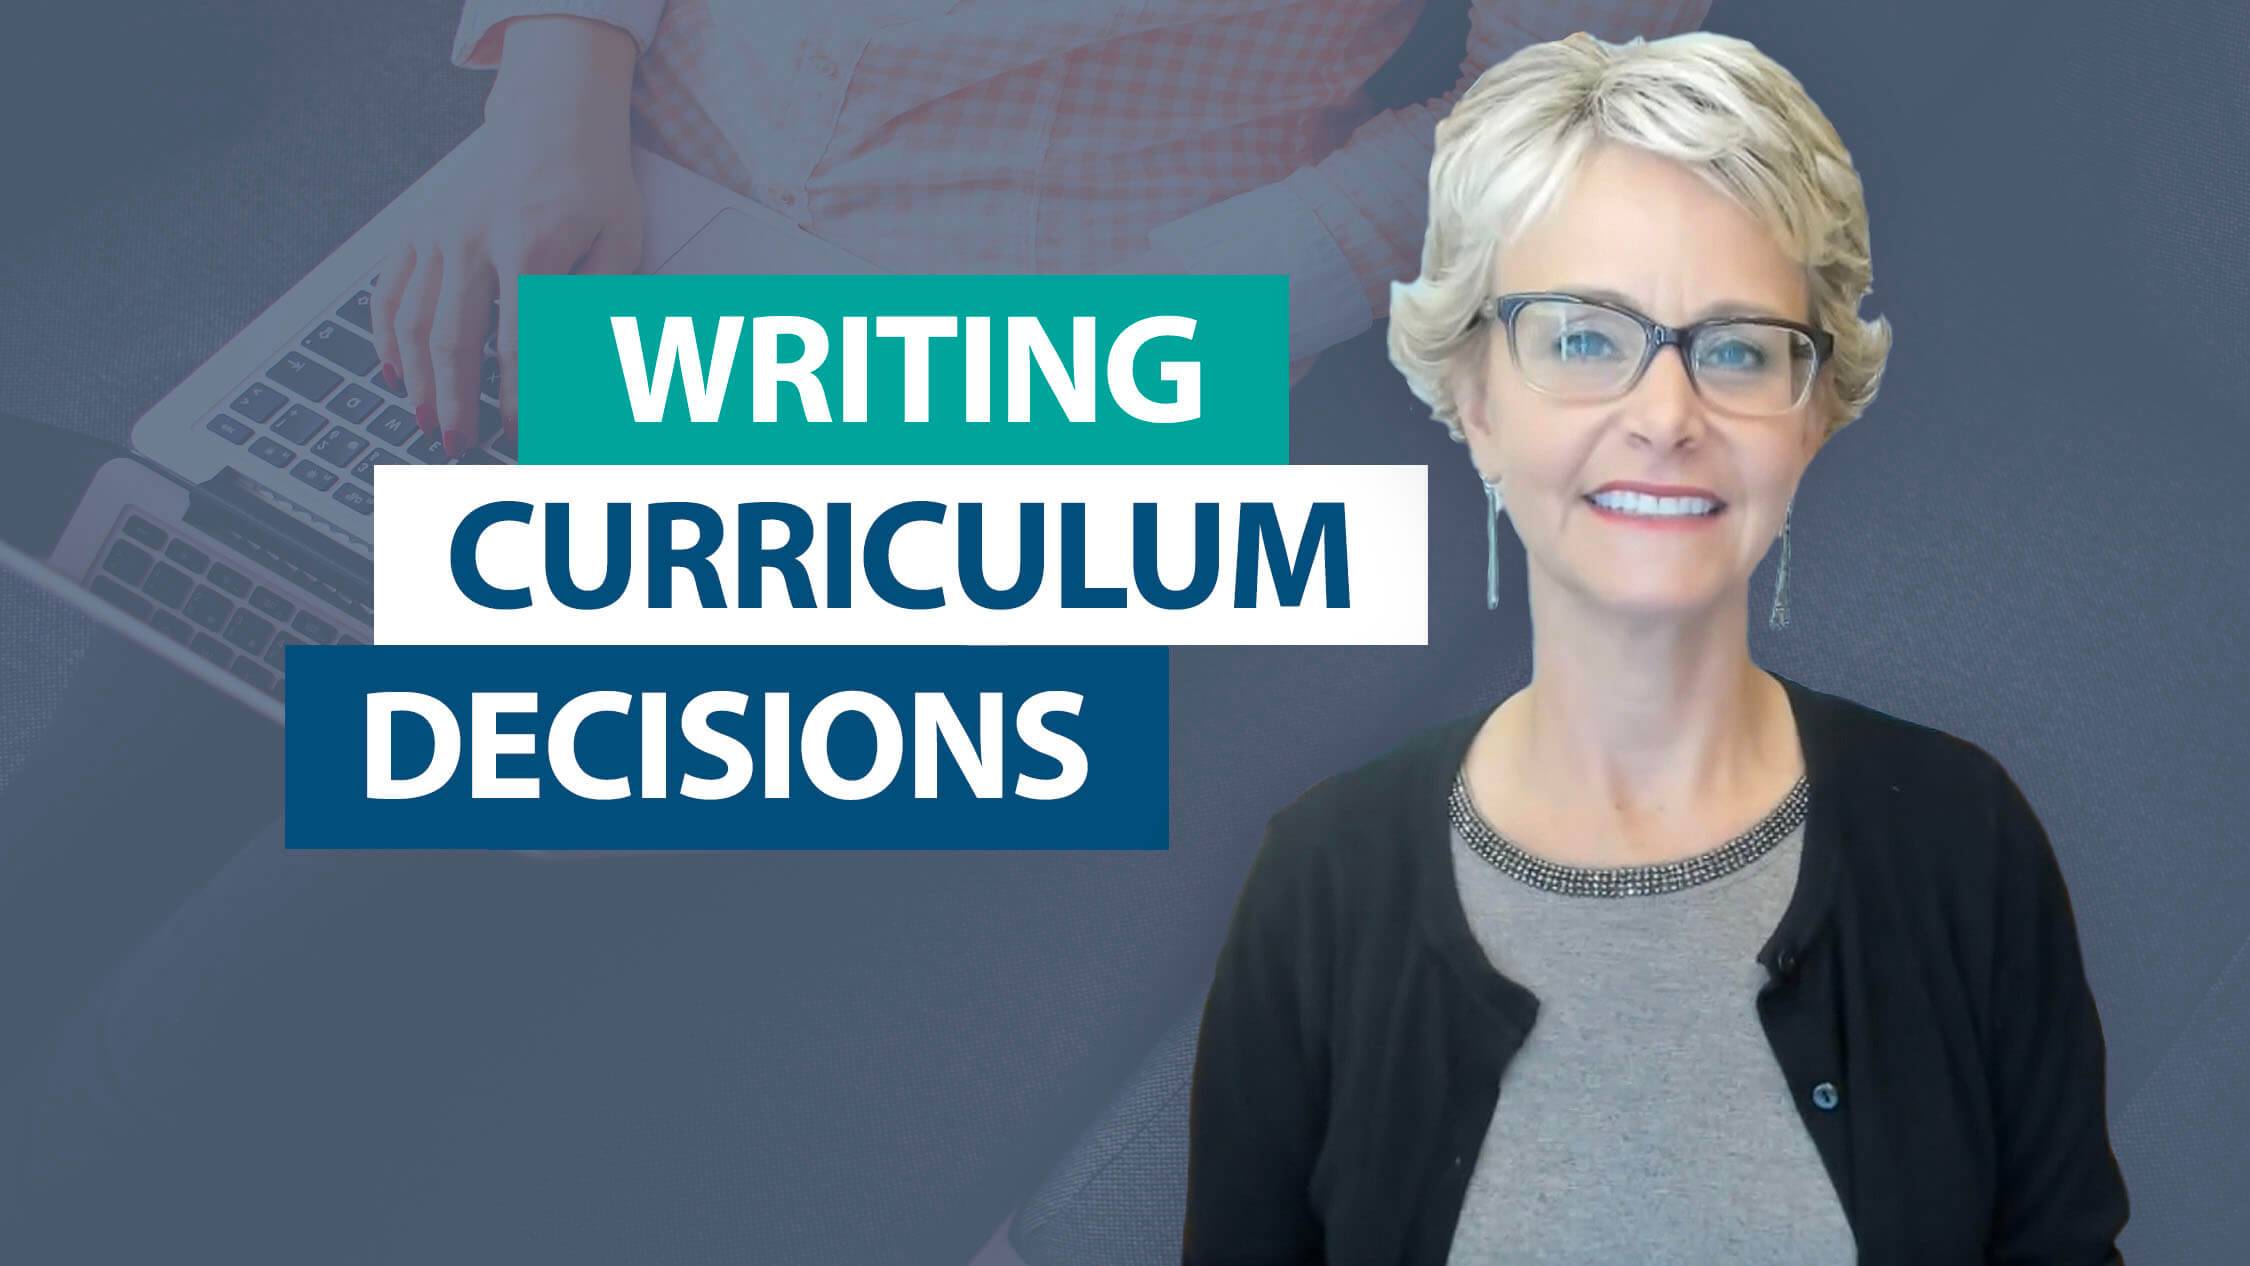 Focus on how writing is taught regardless of curriculum